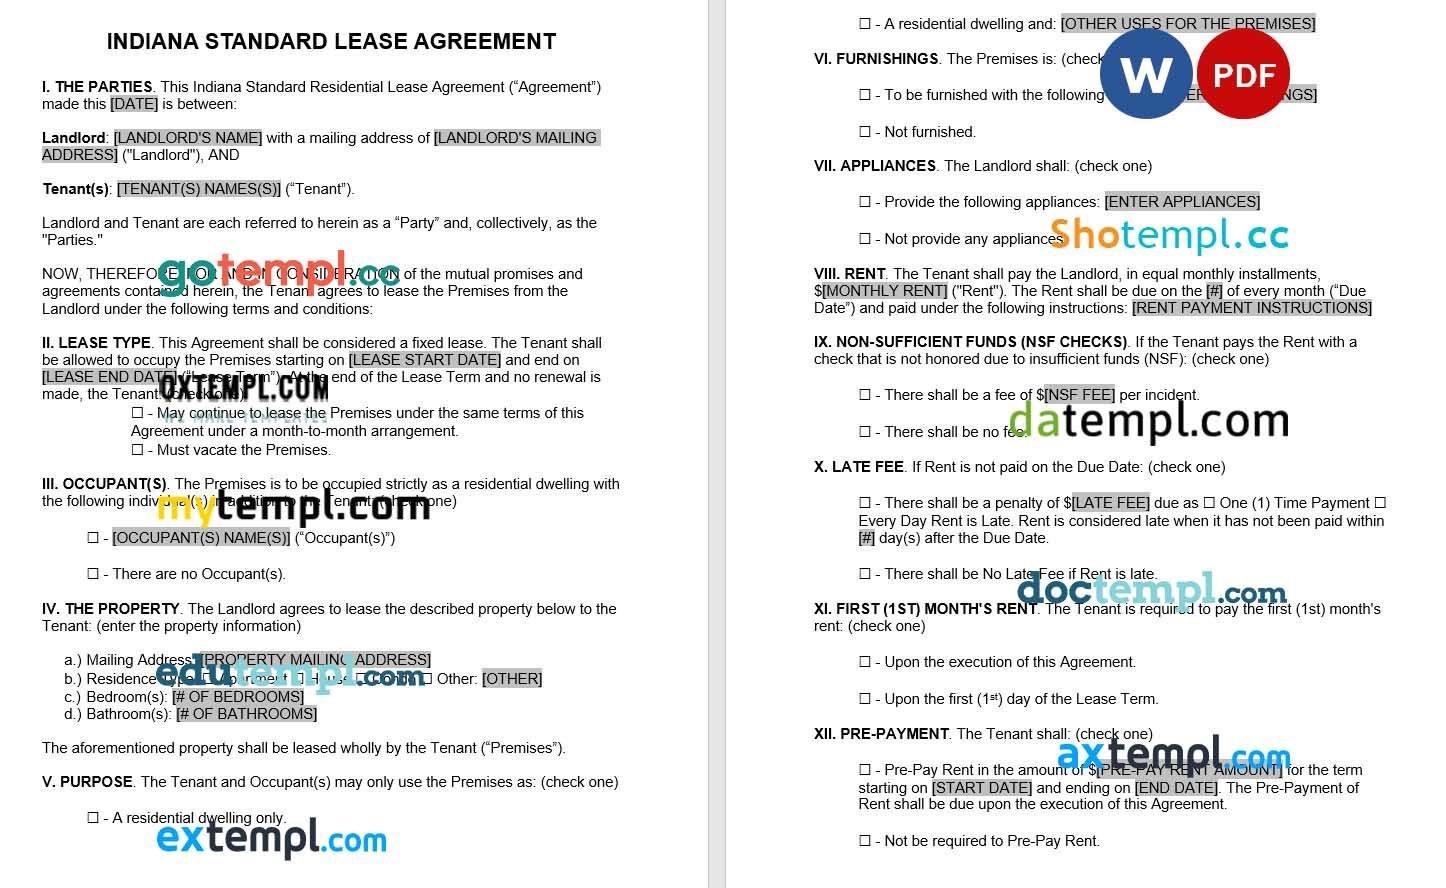 Indianna Standard Lease Agreement Word example, fully editable